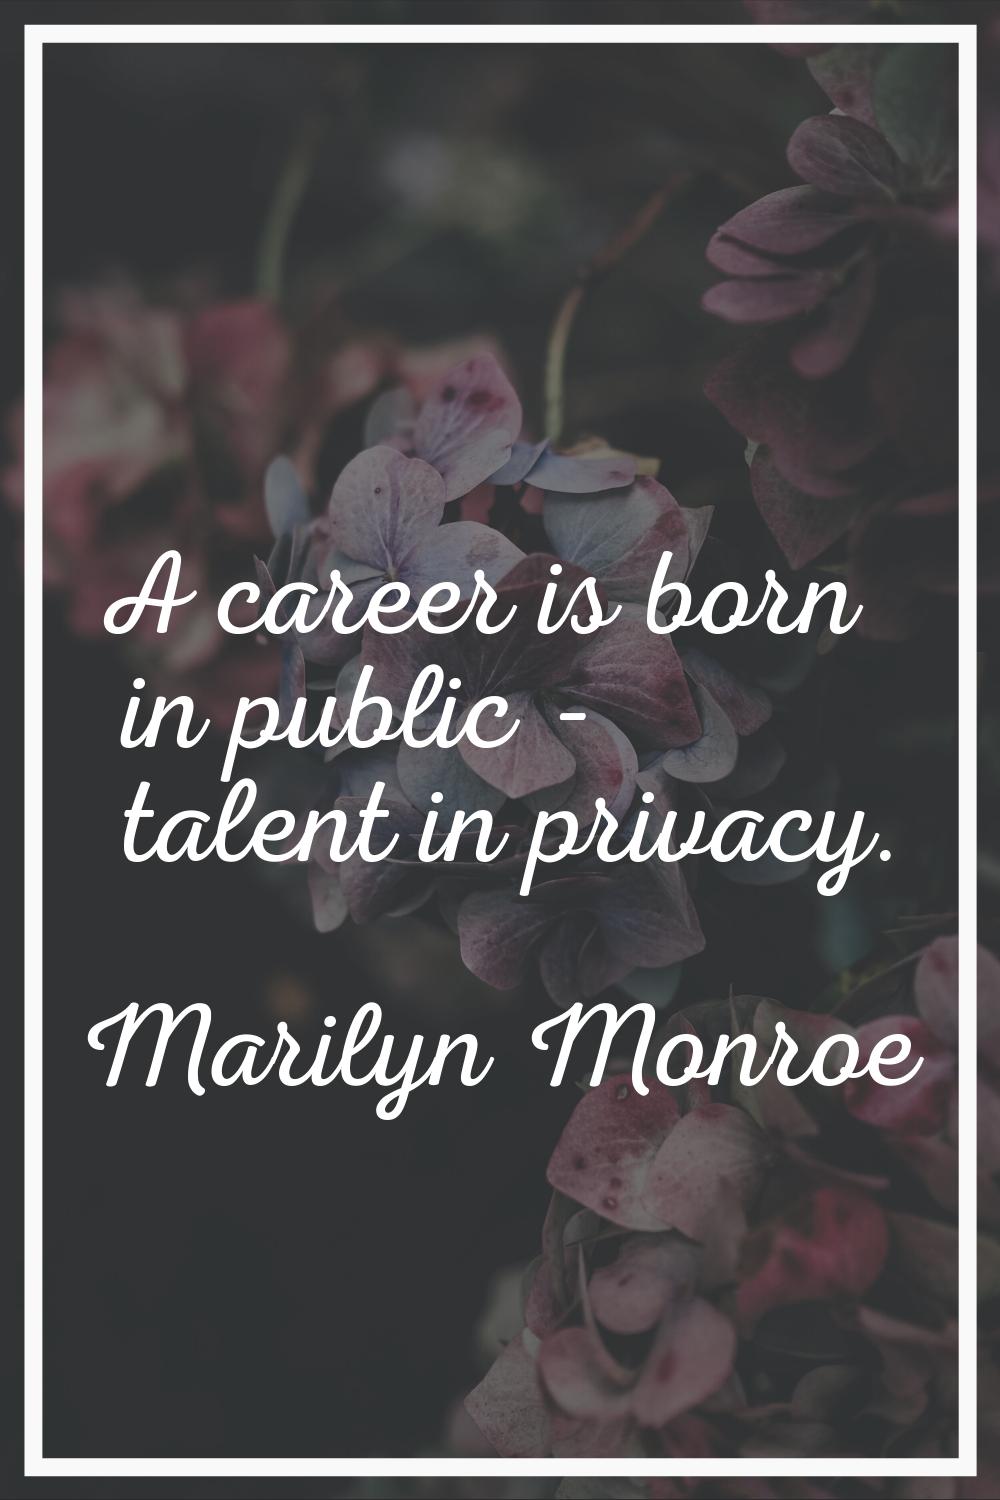 A career is born in public - talent in privacy.